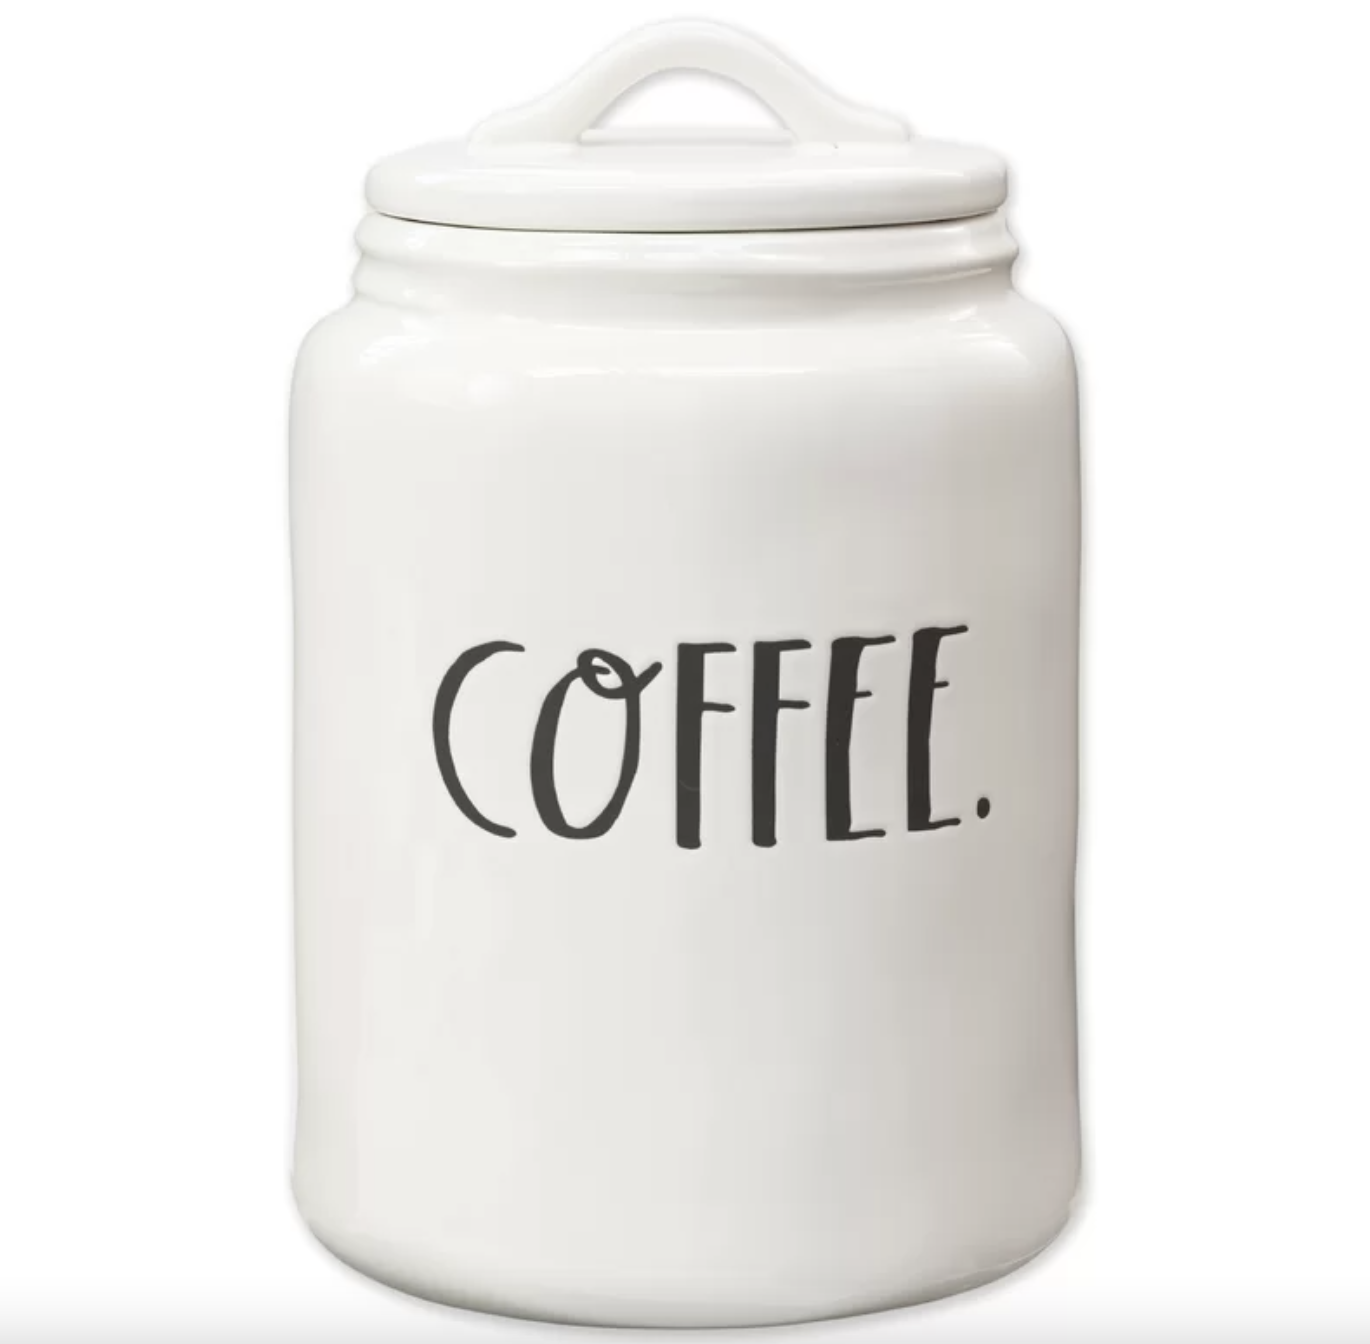 Coffee Gator Large Coffee Canister with Scoop - Keeps Coffee Fresher for  Longer